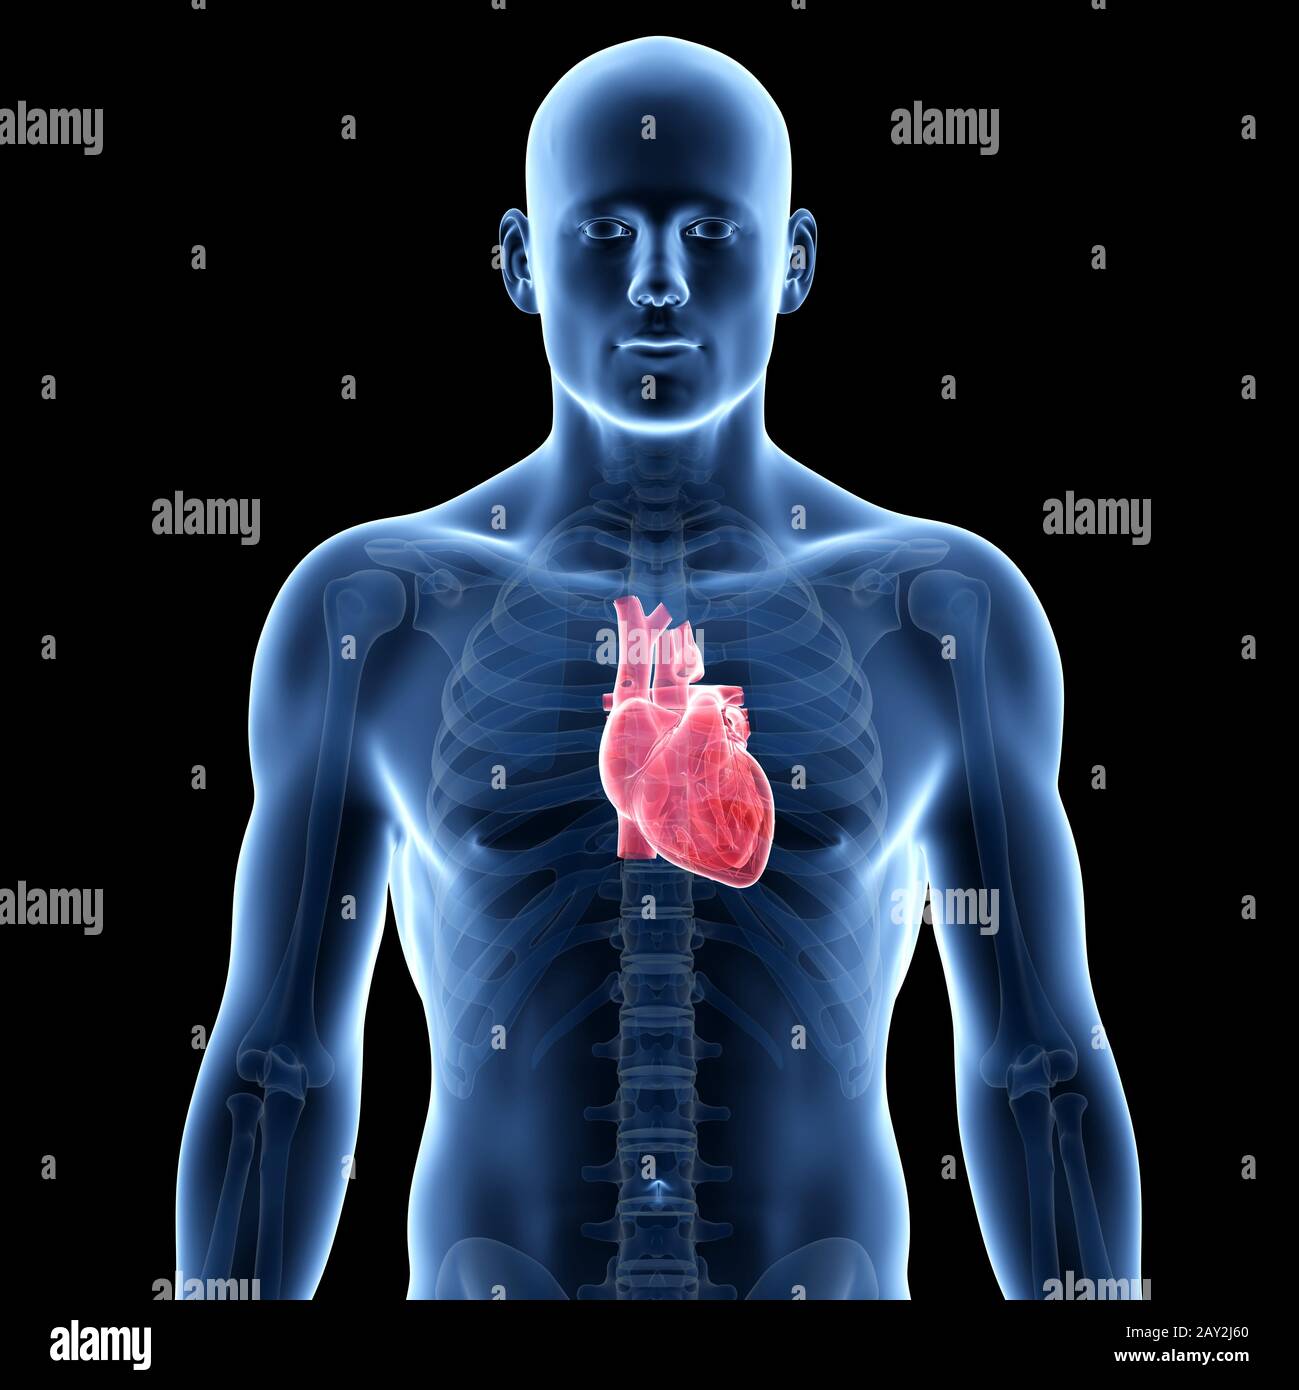 medical illustration of the human heart Stock Photo